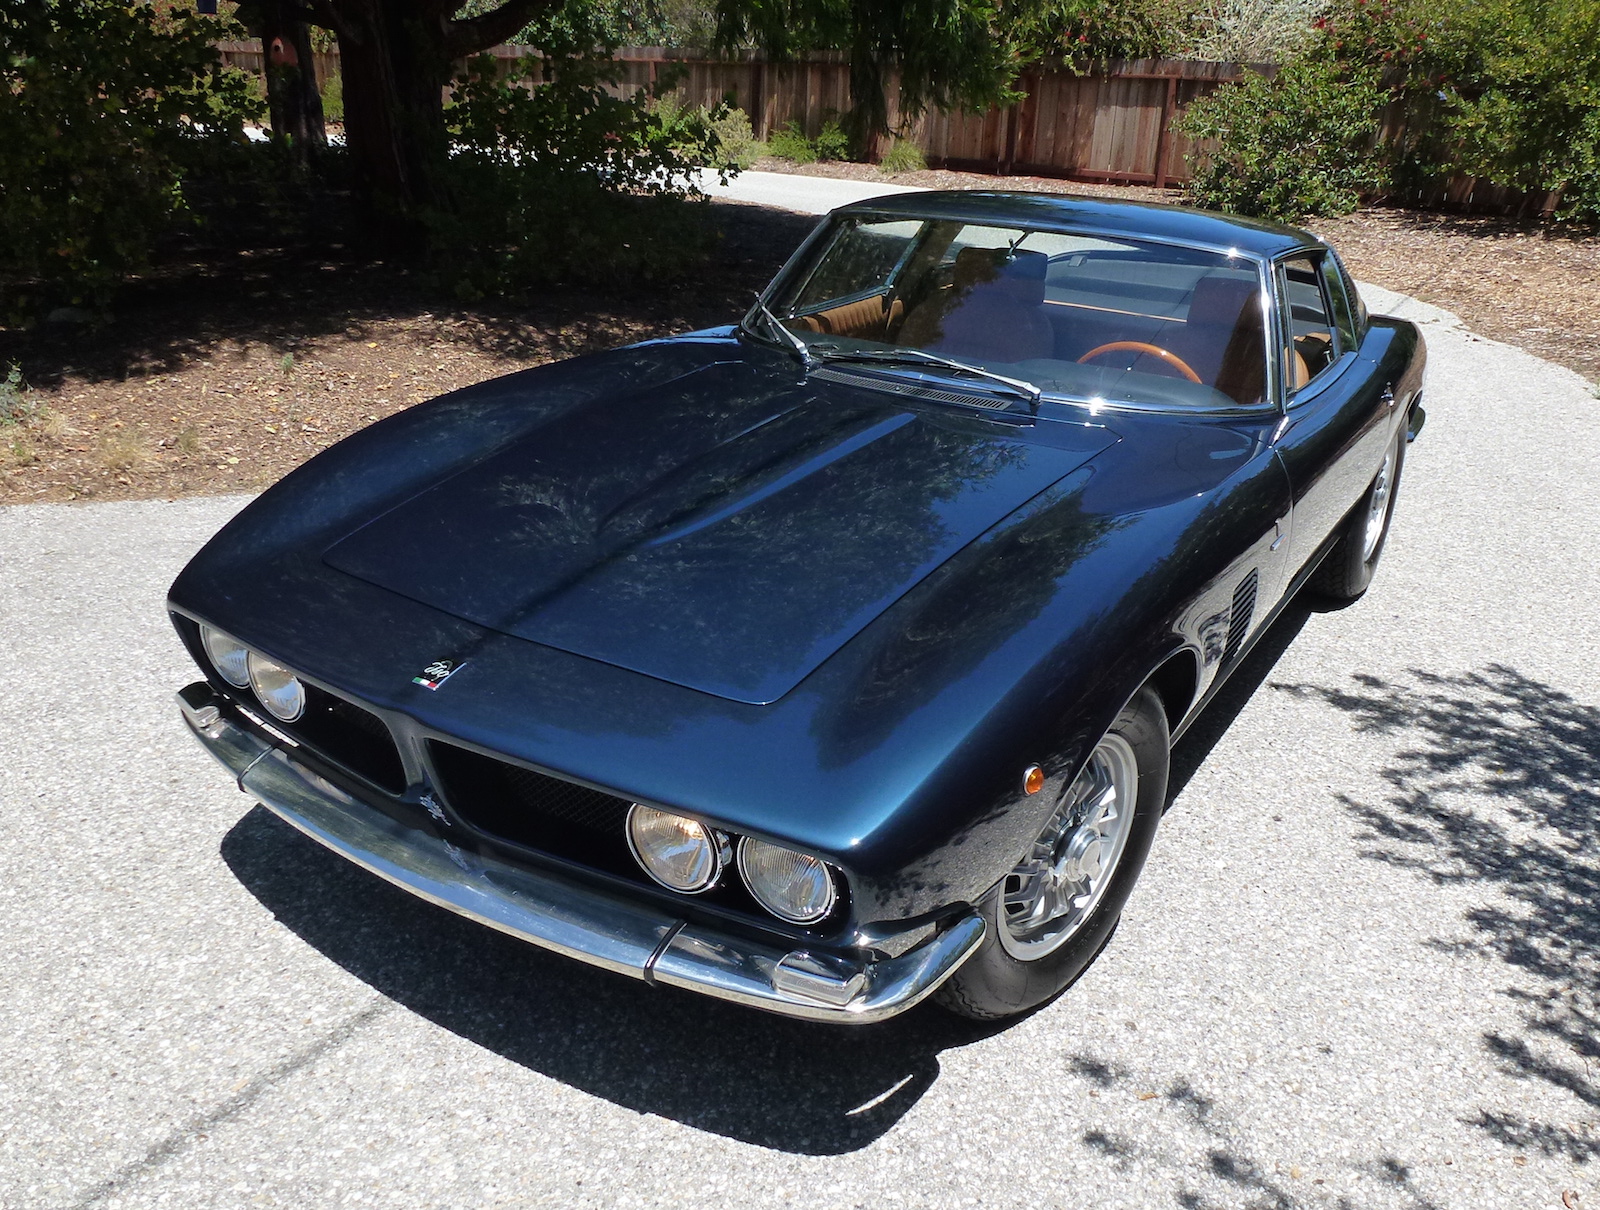 A Short Drive In The Iso Grifo - A Video